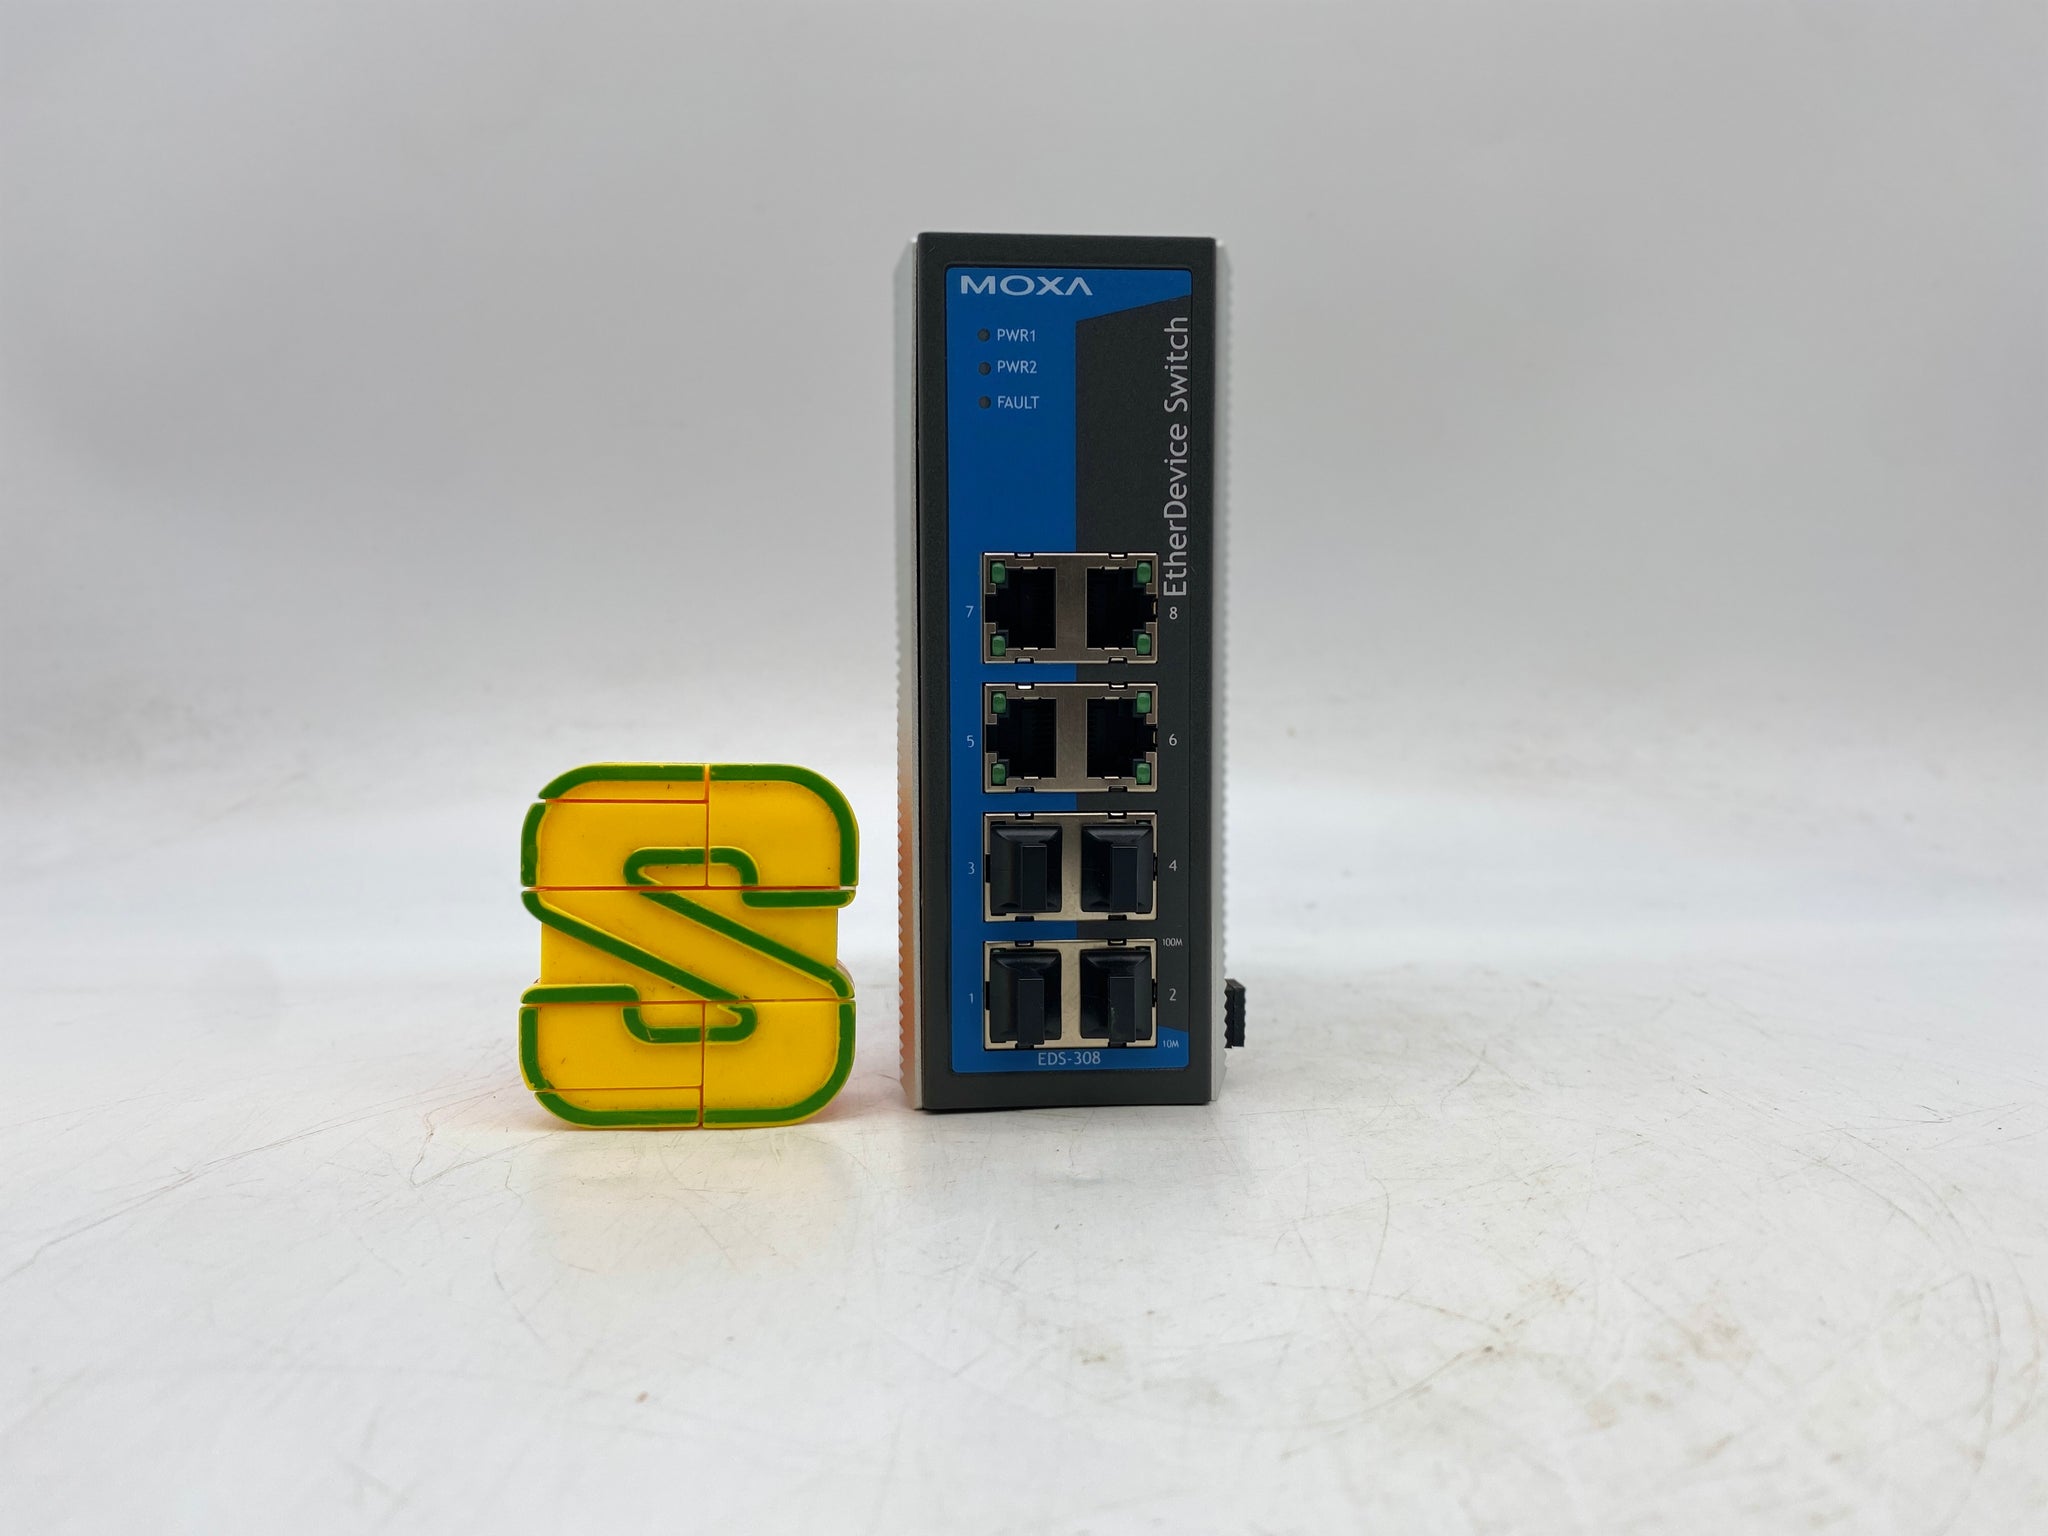 MOXA EDS-308-T Etherdevice Switch 8 Port, Rev 2.2 (Used) – Gulf